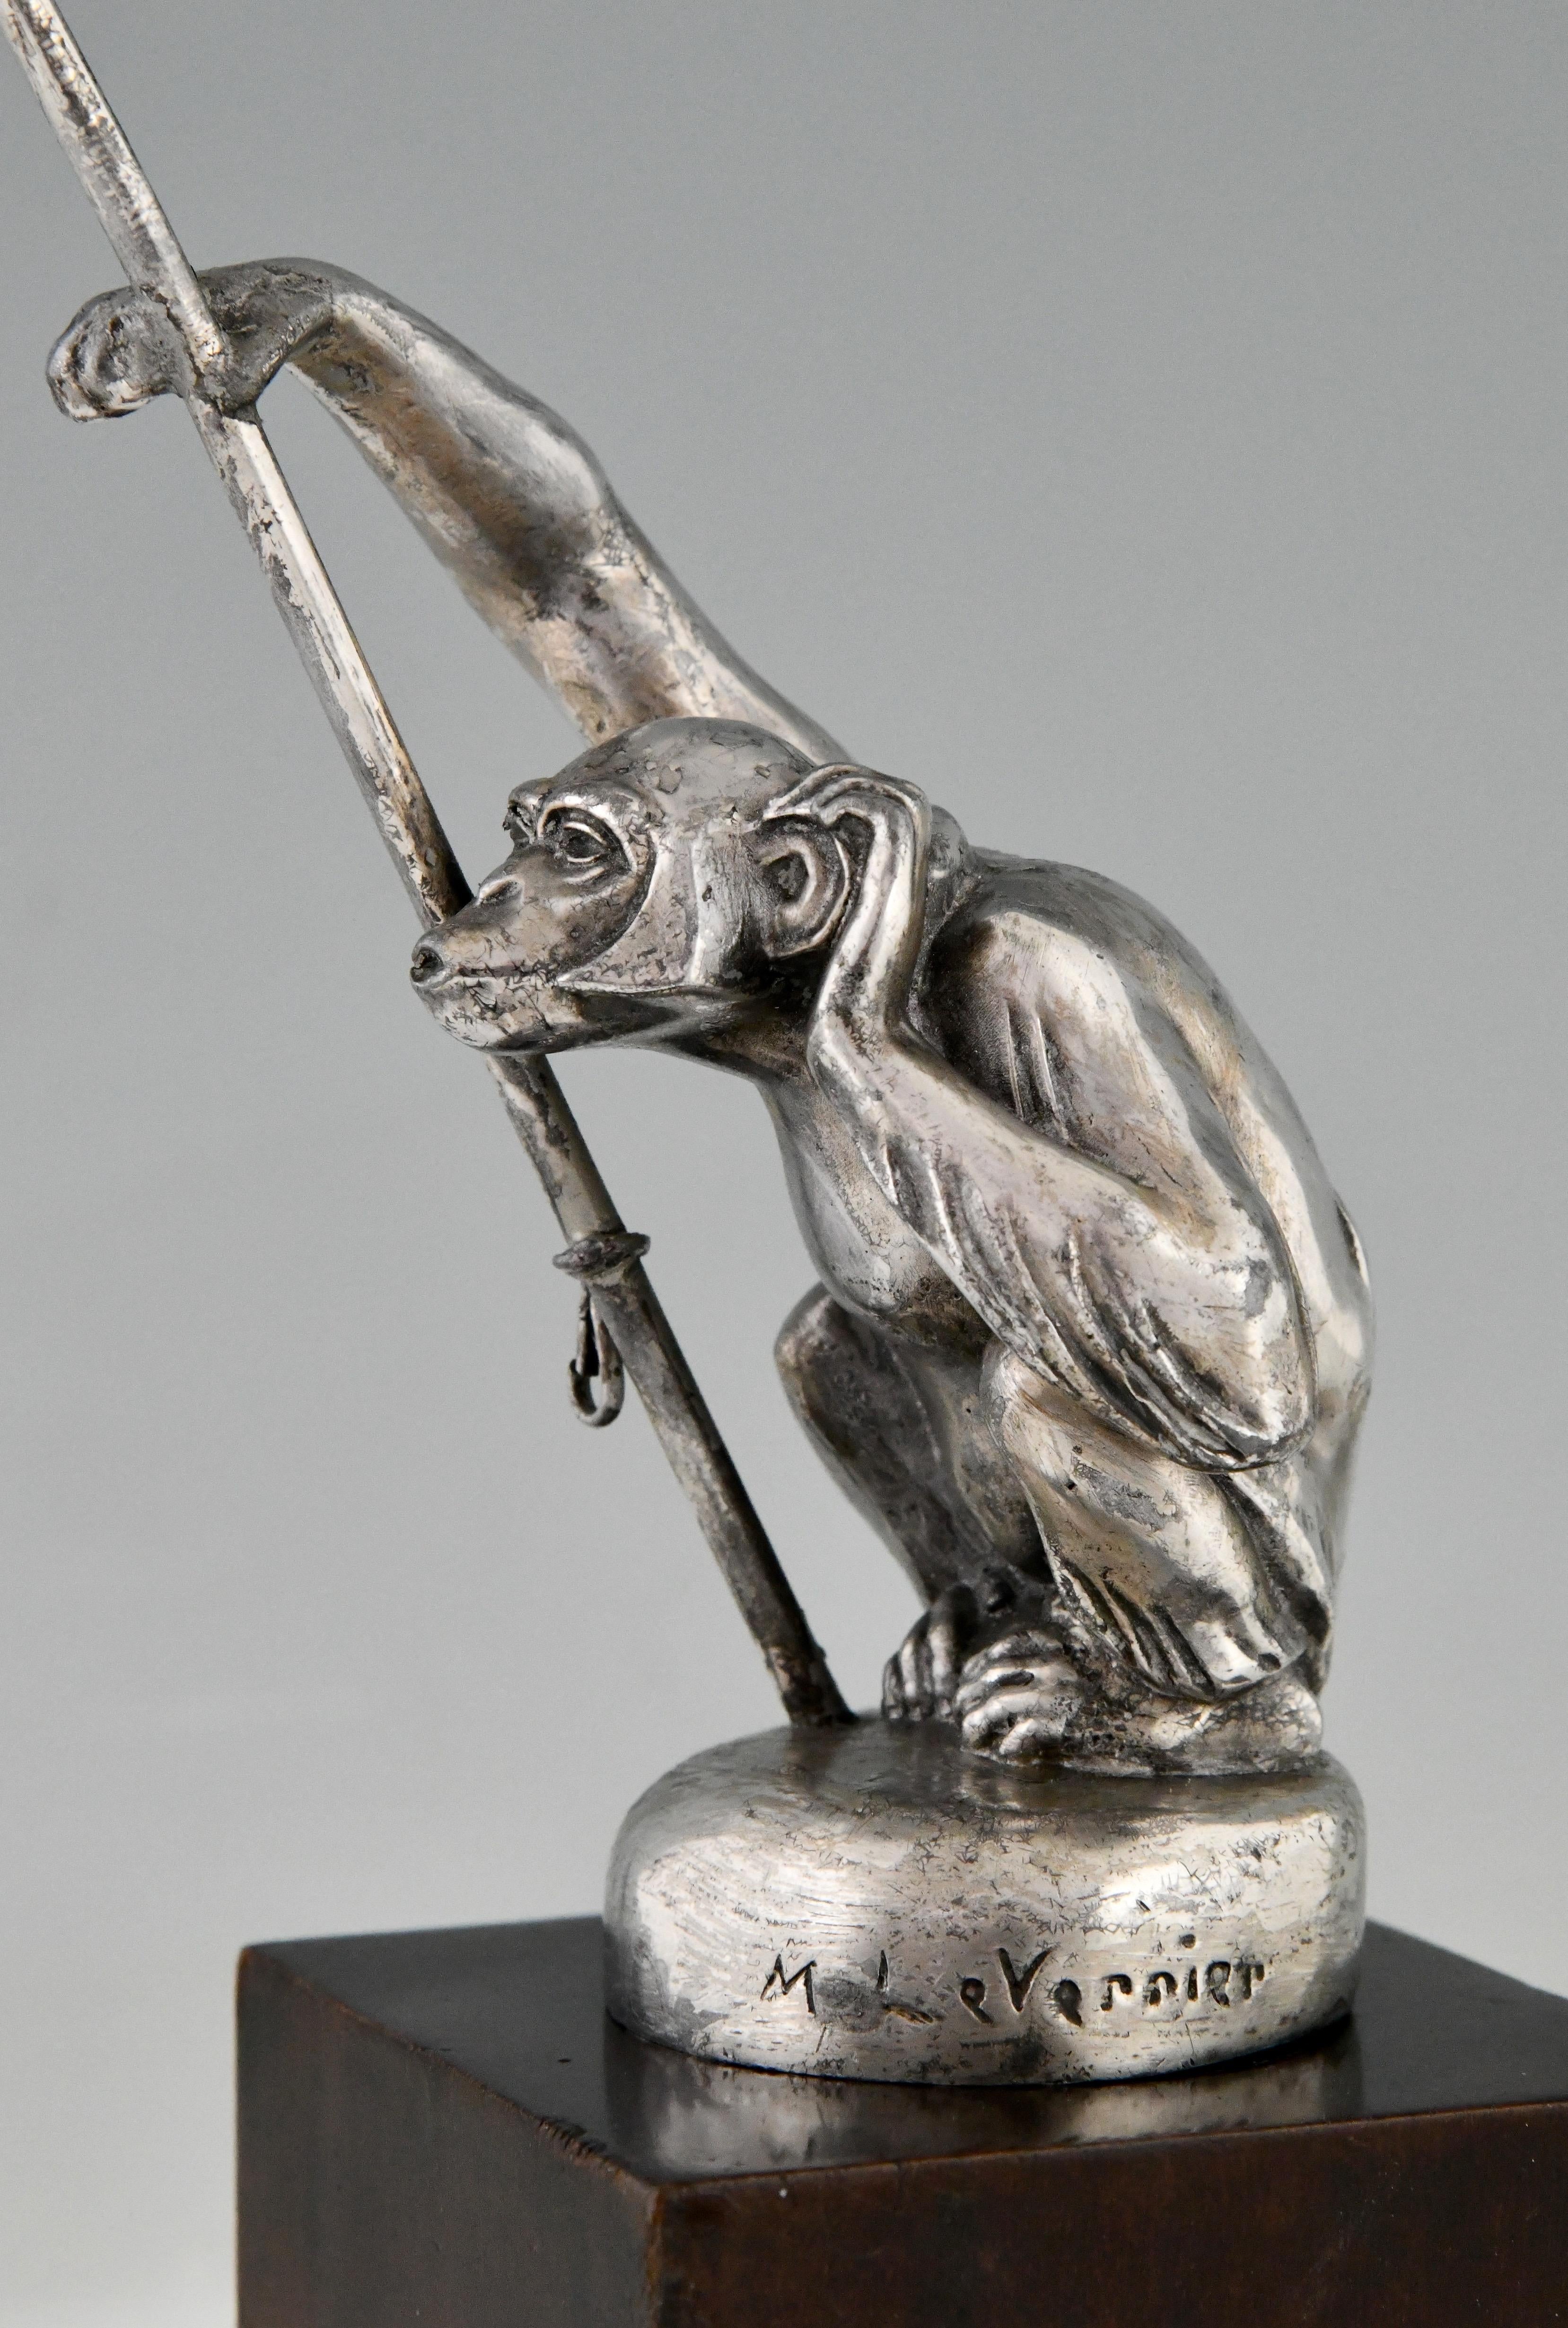 Art Deco monkey car mascot with flag pole Boubou porte drapeau by Max Le Verrier. Metal with original silver patina on wooden base.
France 1920/1930. 
This model hood ornament is very hard to find.
This car mascot is illustrated in the book